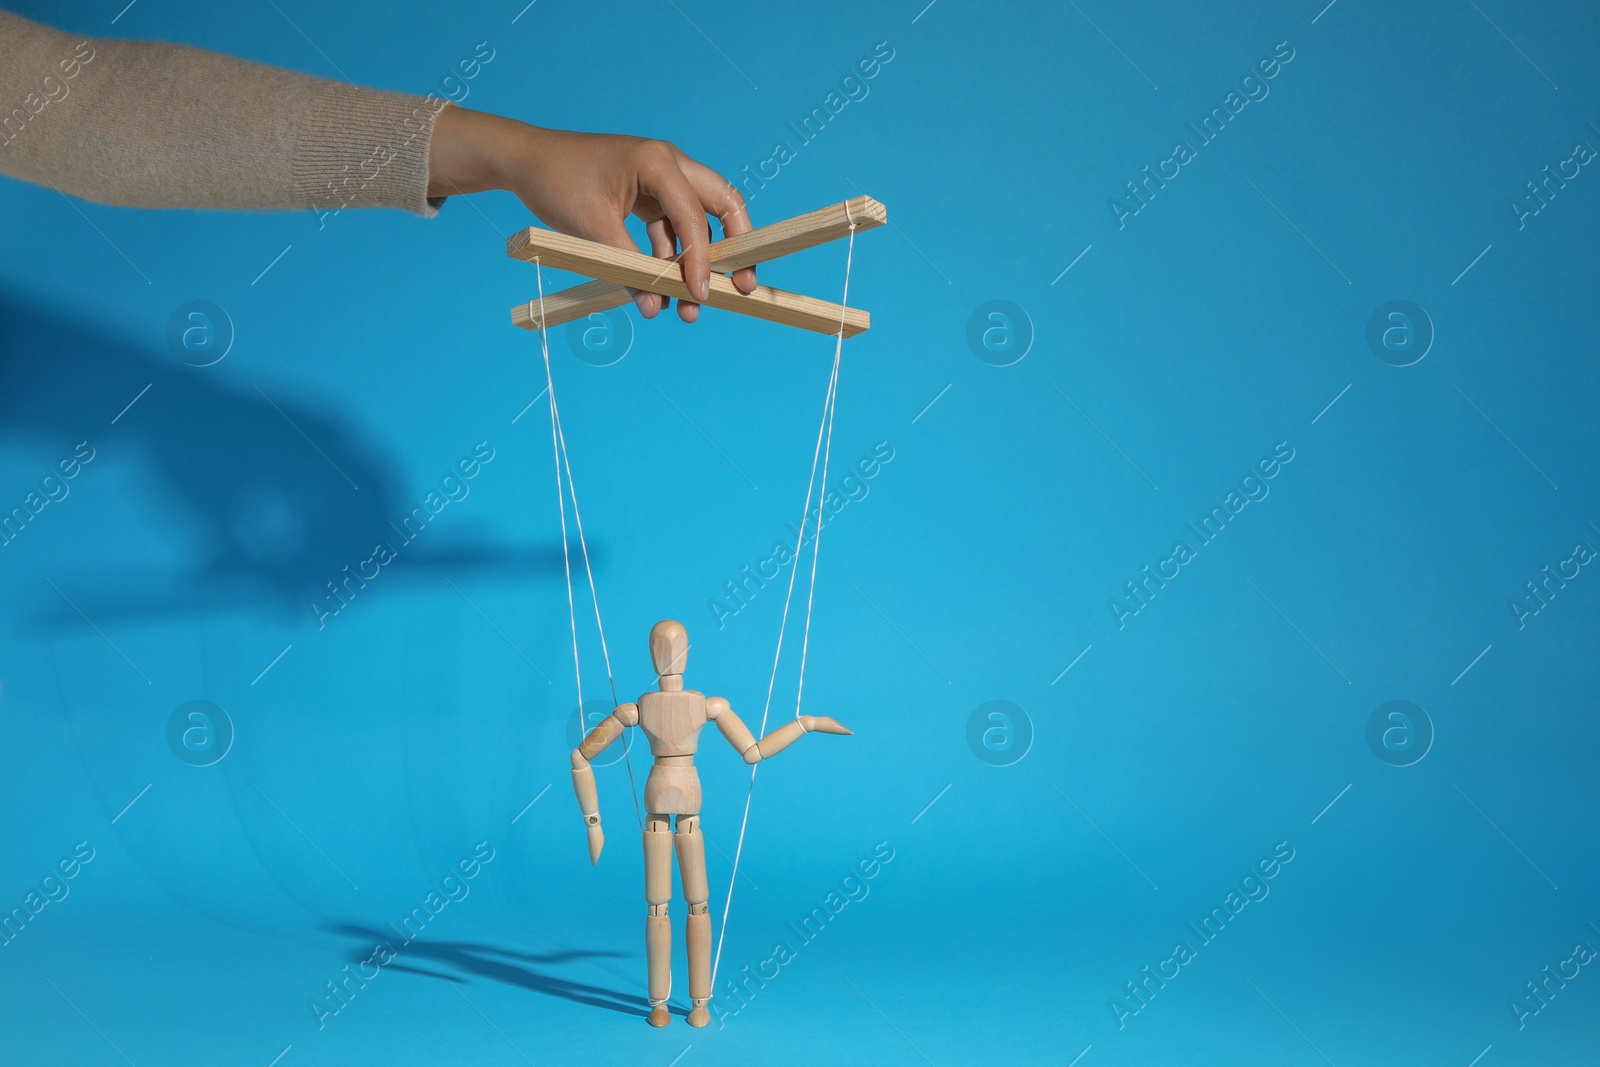 Photo of Woman pulling strings of puppet on light blue background, closeup